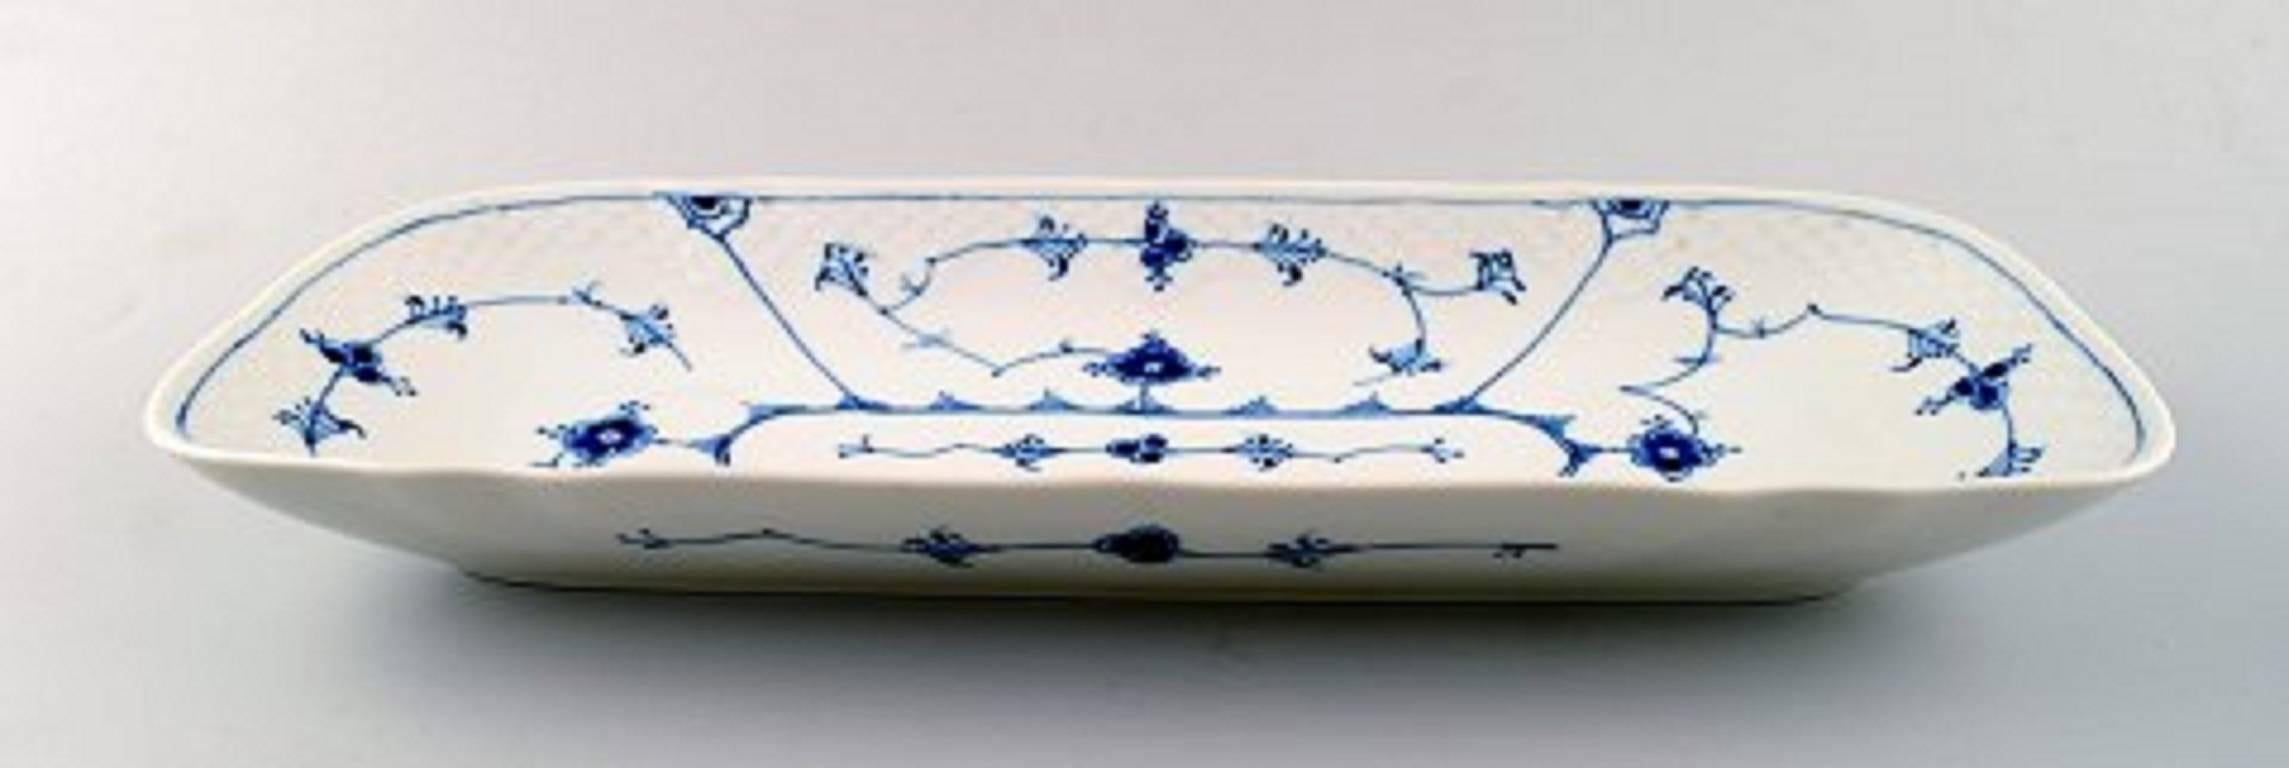 Bing & Grondahl / B&G blue fluted rectangular large celery dish.
Measures: 38 x 15 x 5 cm. 
Number 378.
1. Quality, in perfect condition.